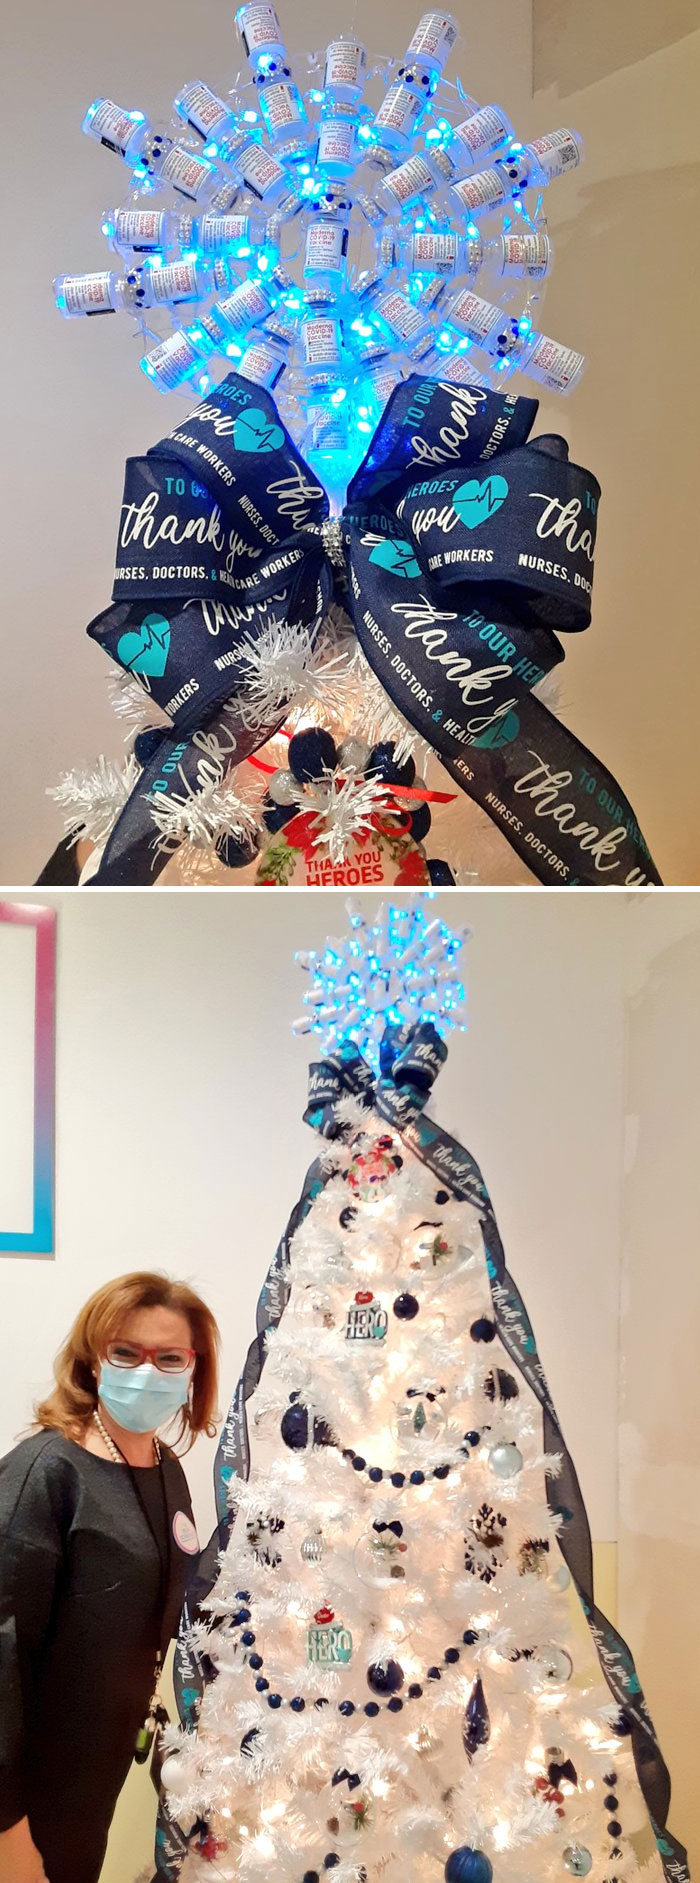 This Phenomenal Nurse, Lizette, Had The Creative Insight (& Energy!) To Create Christmas Tree Decorations From Empty Moderna Vials. How Cool